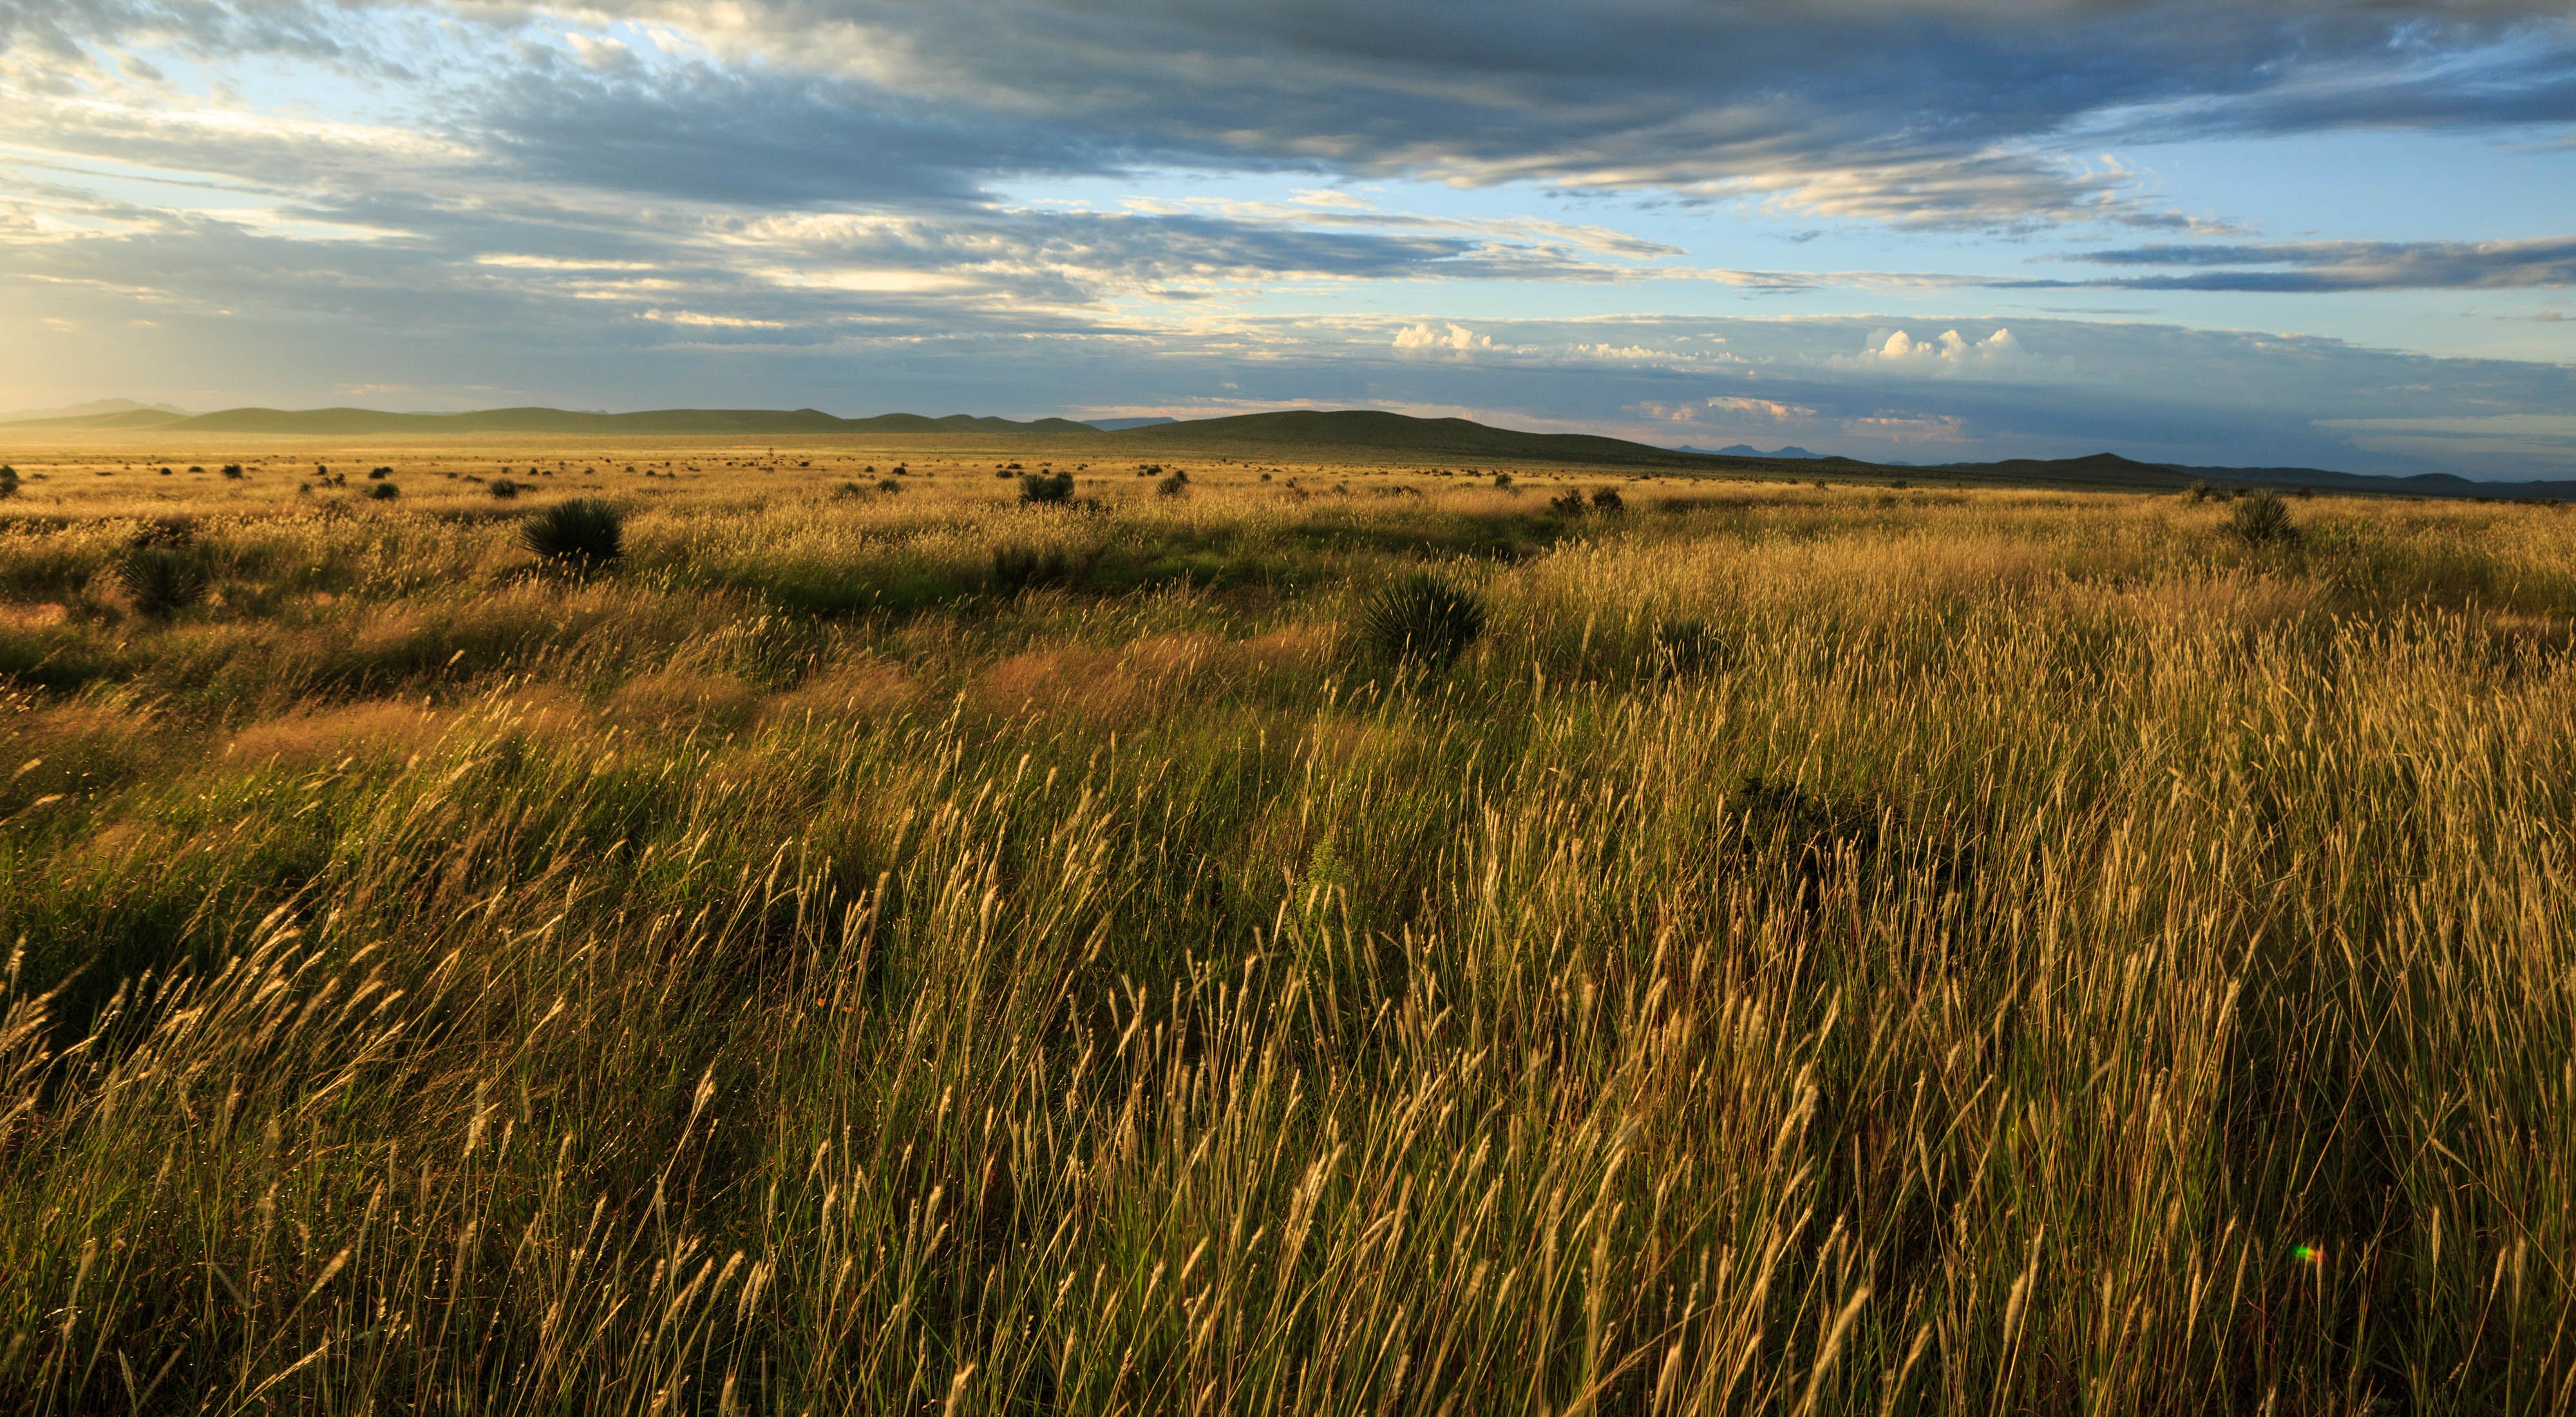 An open expanse of sweeping brown grasslands swaying in the wind and low mountains.